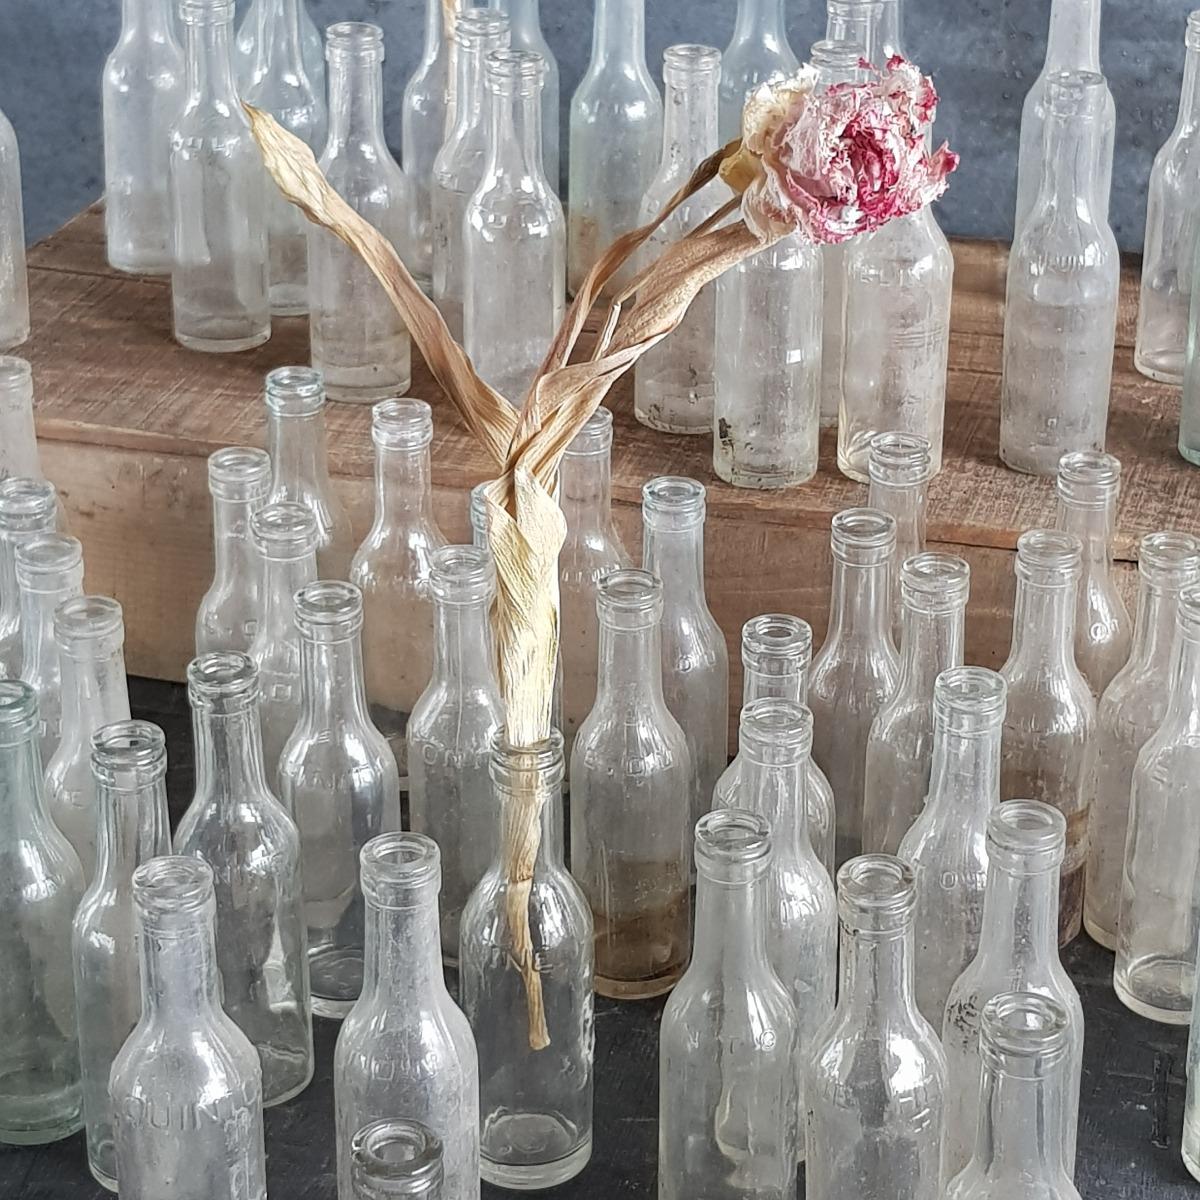 80 old small vases